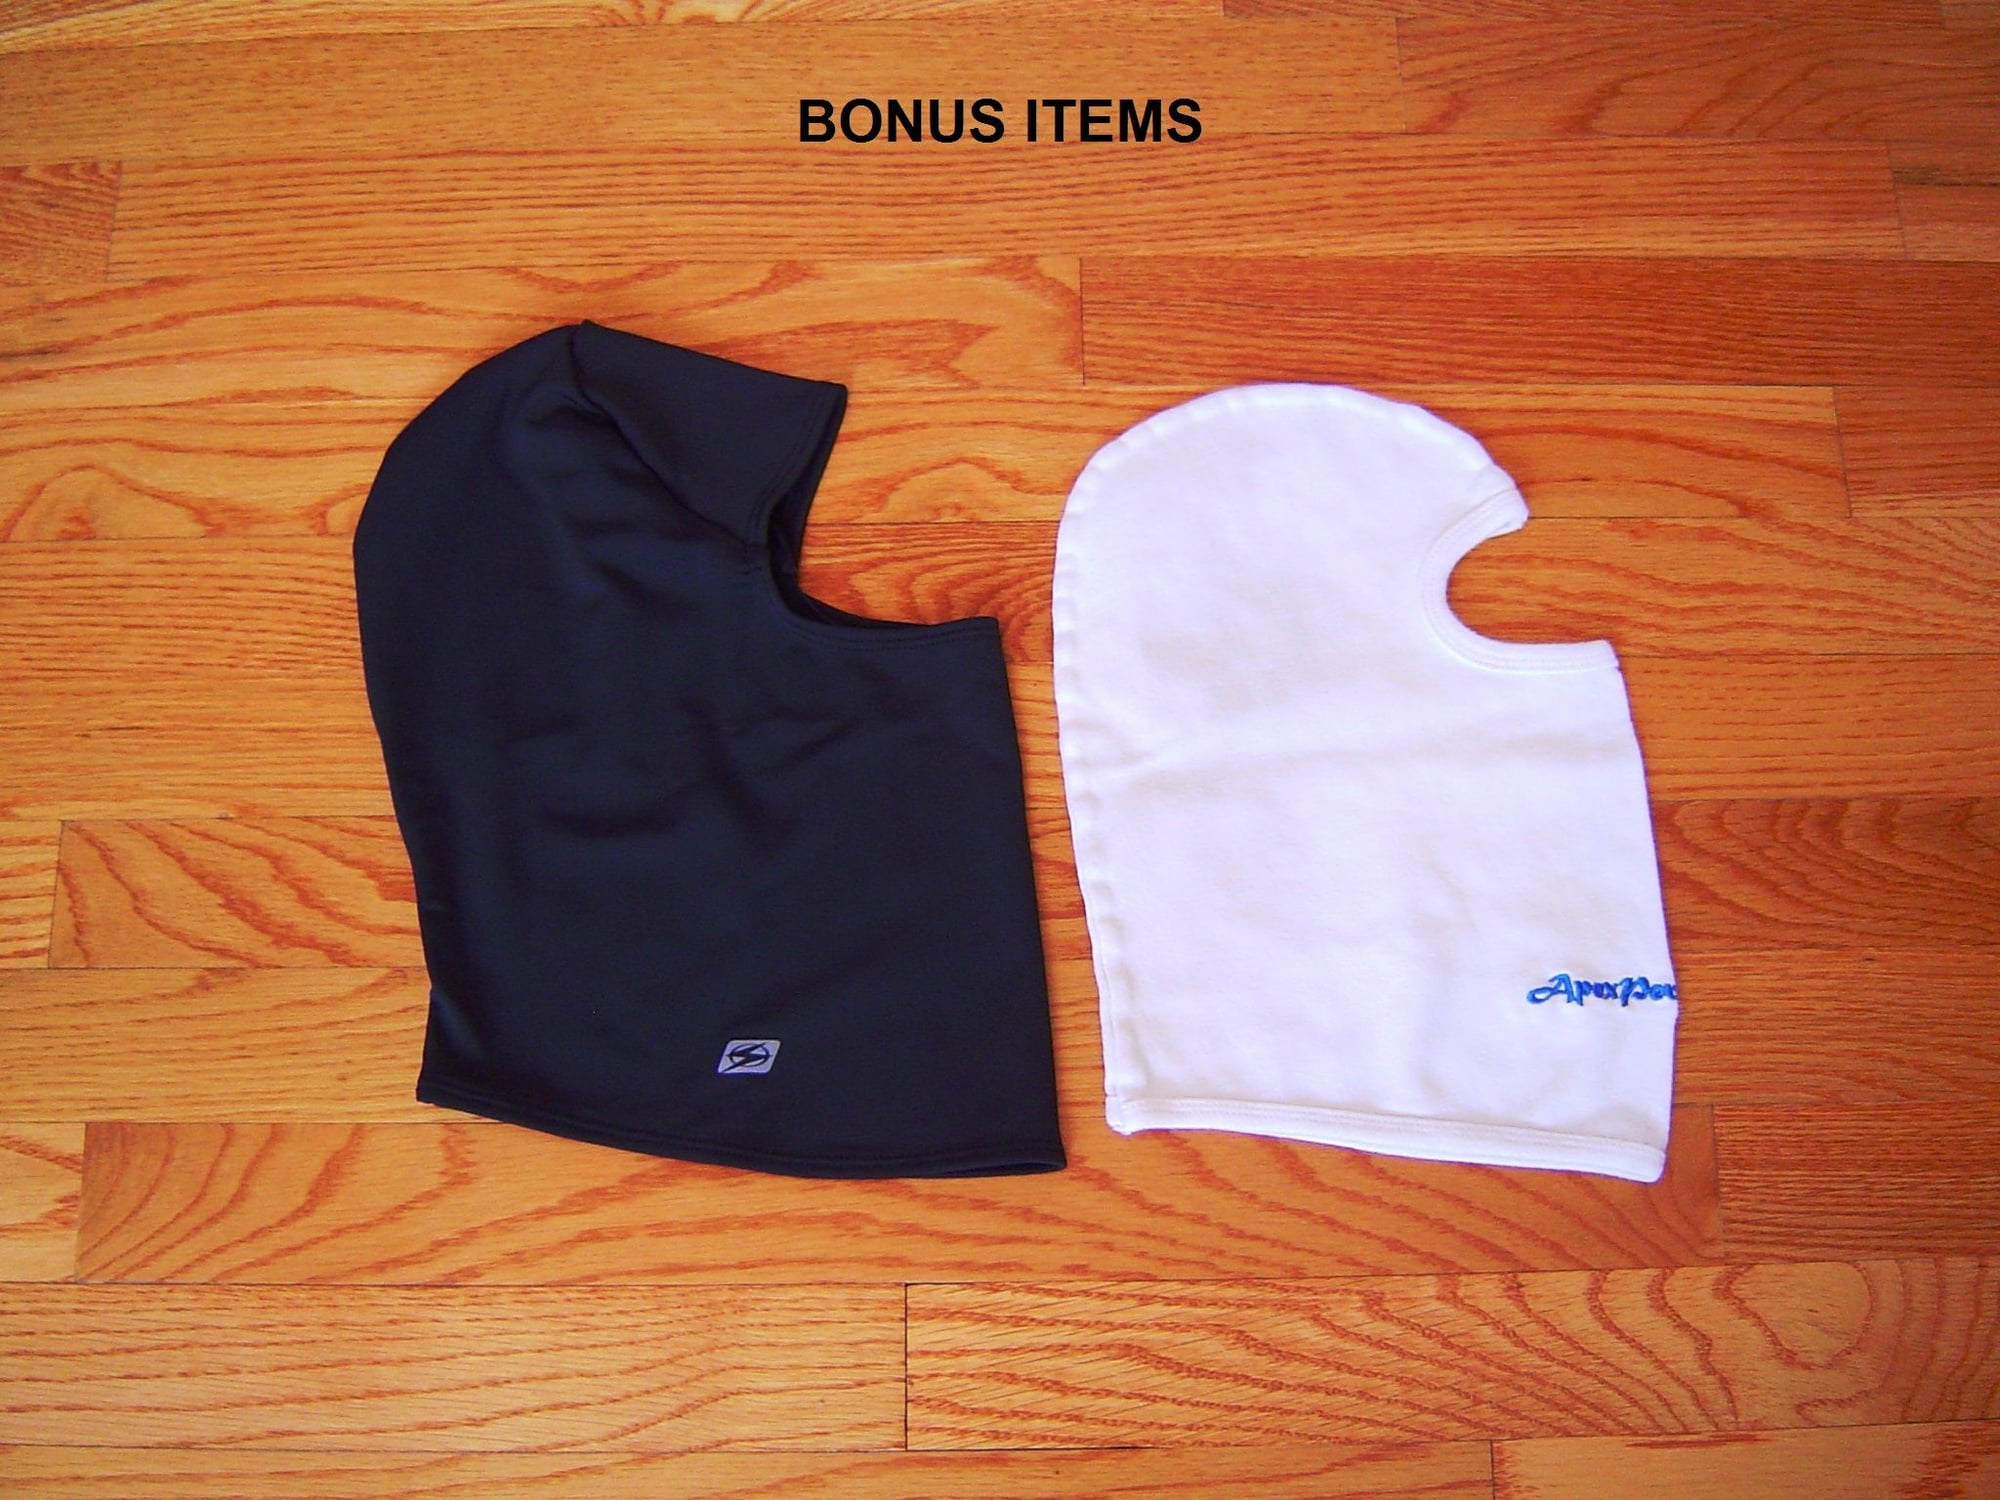 Miscellaneous - LICO RACING SUIT + Accessories, VERY SHARP! - Used - Allentown, PA 18106, United States